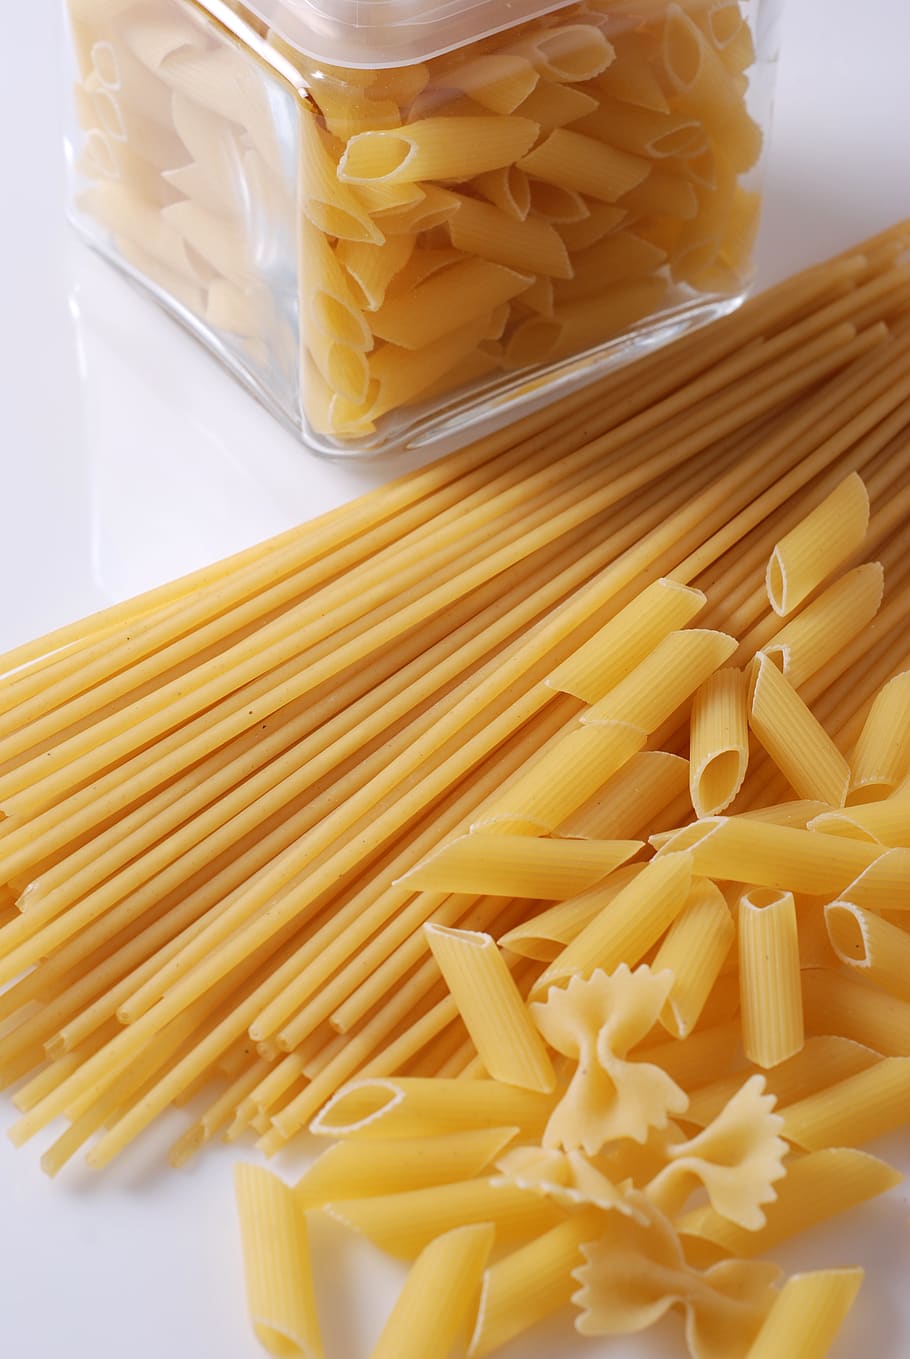 pasta, food, italian, noodles, spaghetti, kitchen, cook, nutrition, delicious, carbohydrates